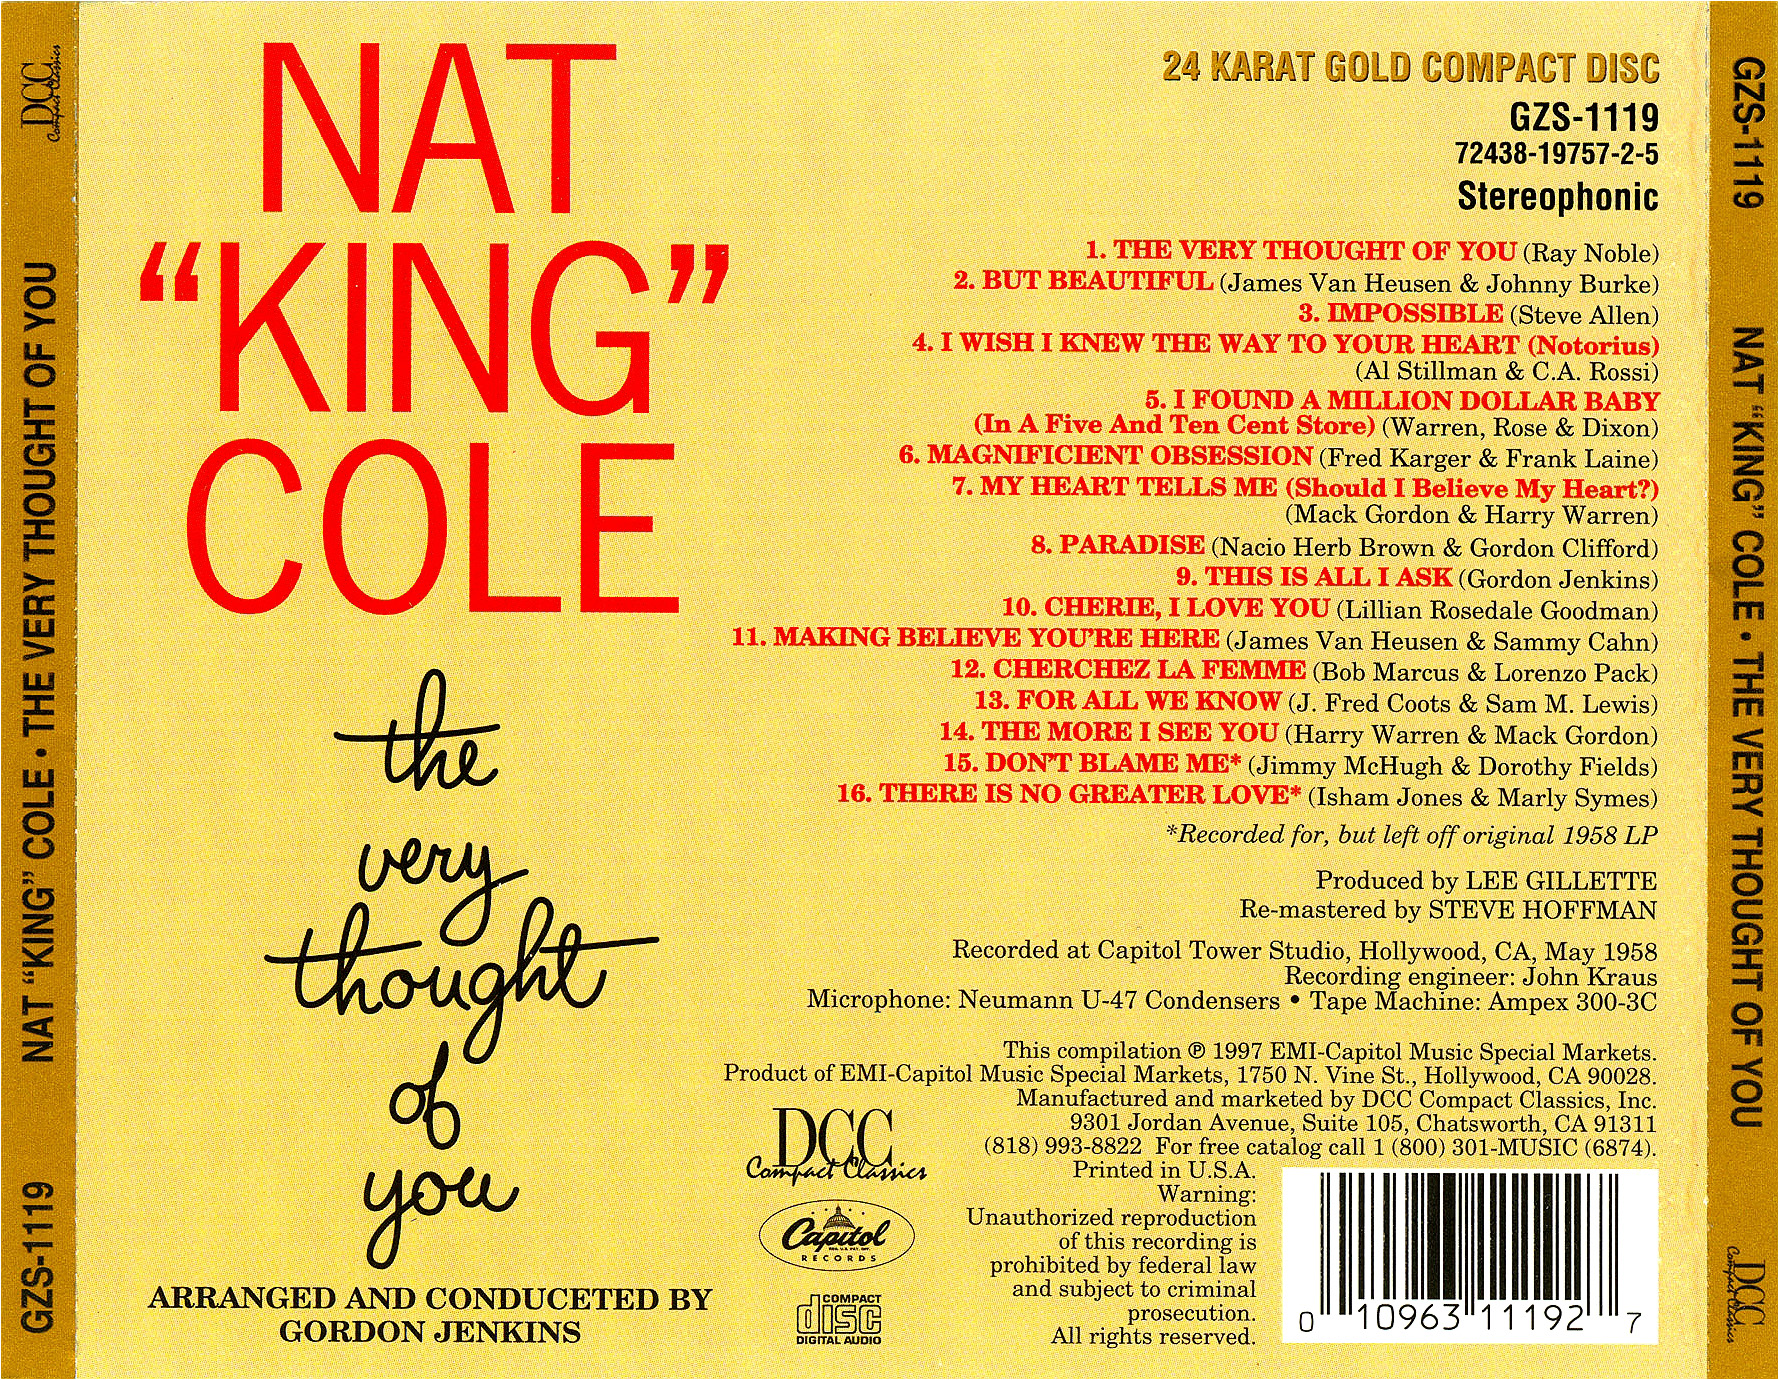 Нат лов. Nat King Cole 1958 the very thought of you. Love Nat King Cole текст. Nat "King" Cole слова. 1977 - Best of Nat King Cole.